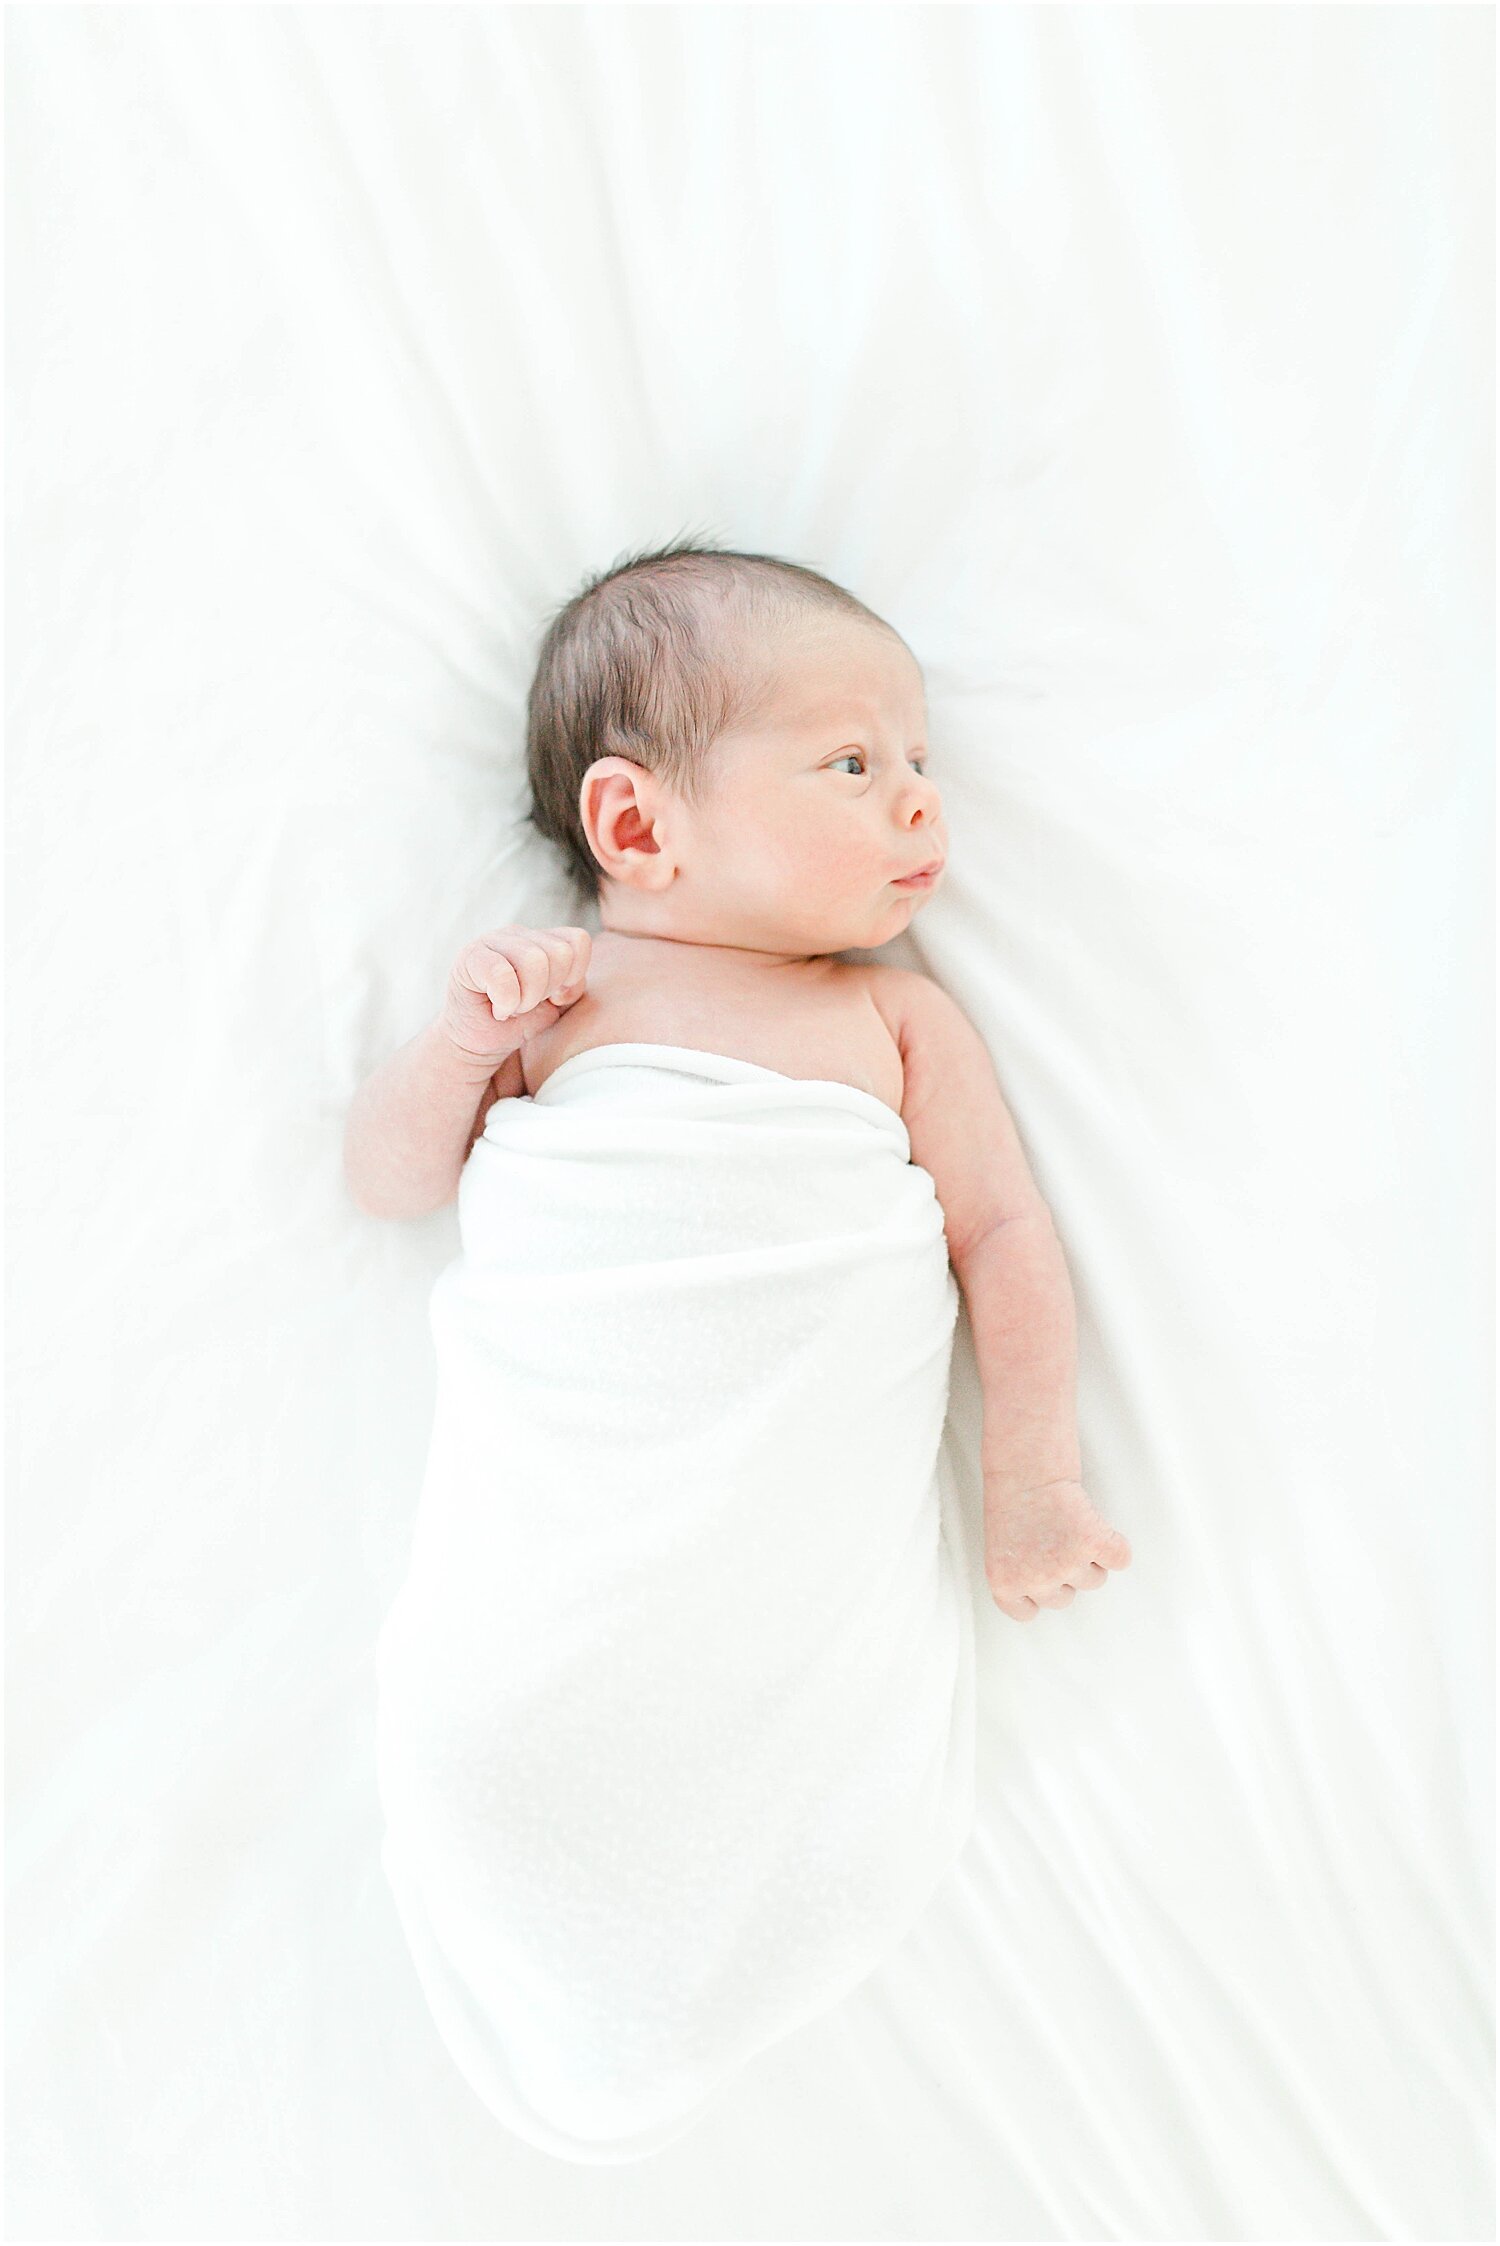 Simple lifestyle newborn session. Photos by Westport Lifestyle Newborn Photographer, Kristin Wood Photography.